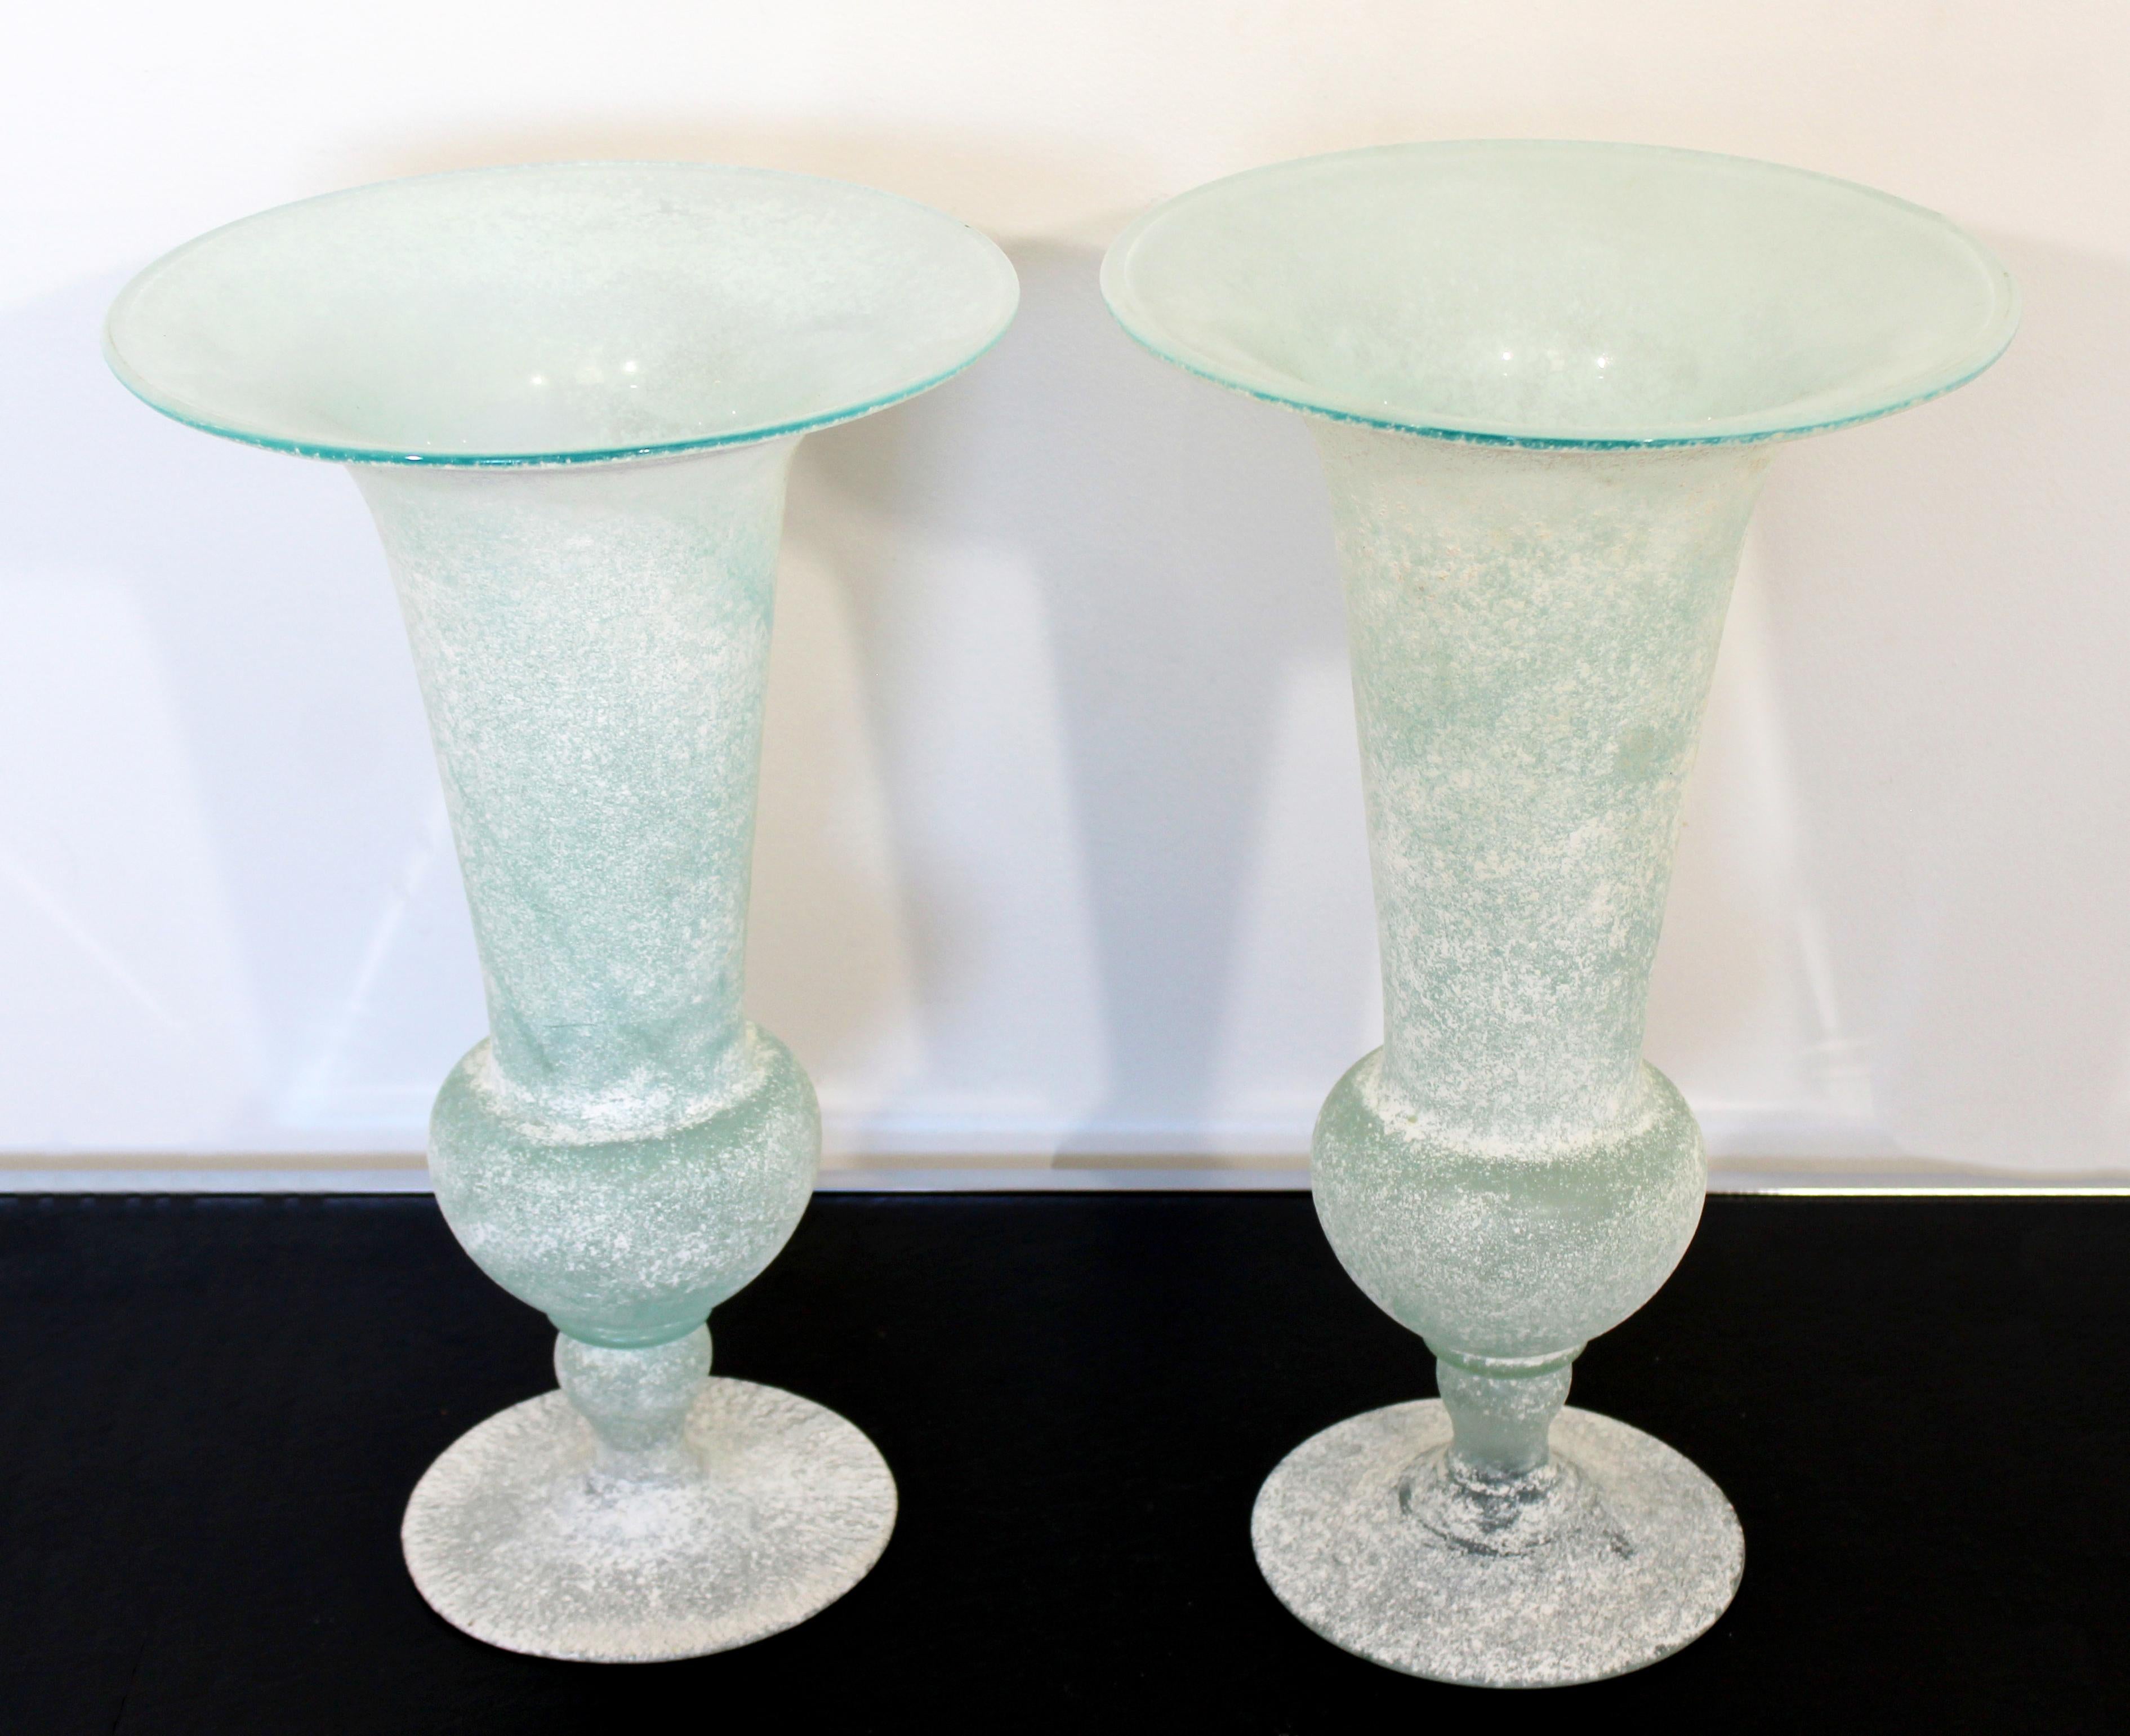 For your consideration is a breathtaking pair of glass vessels or vases, made in Italy, by Seguso Vetri d'Arte, circa 1980s. In excellent condition. The dimensions are 11.5